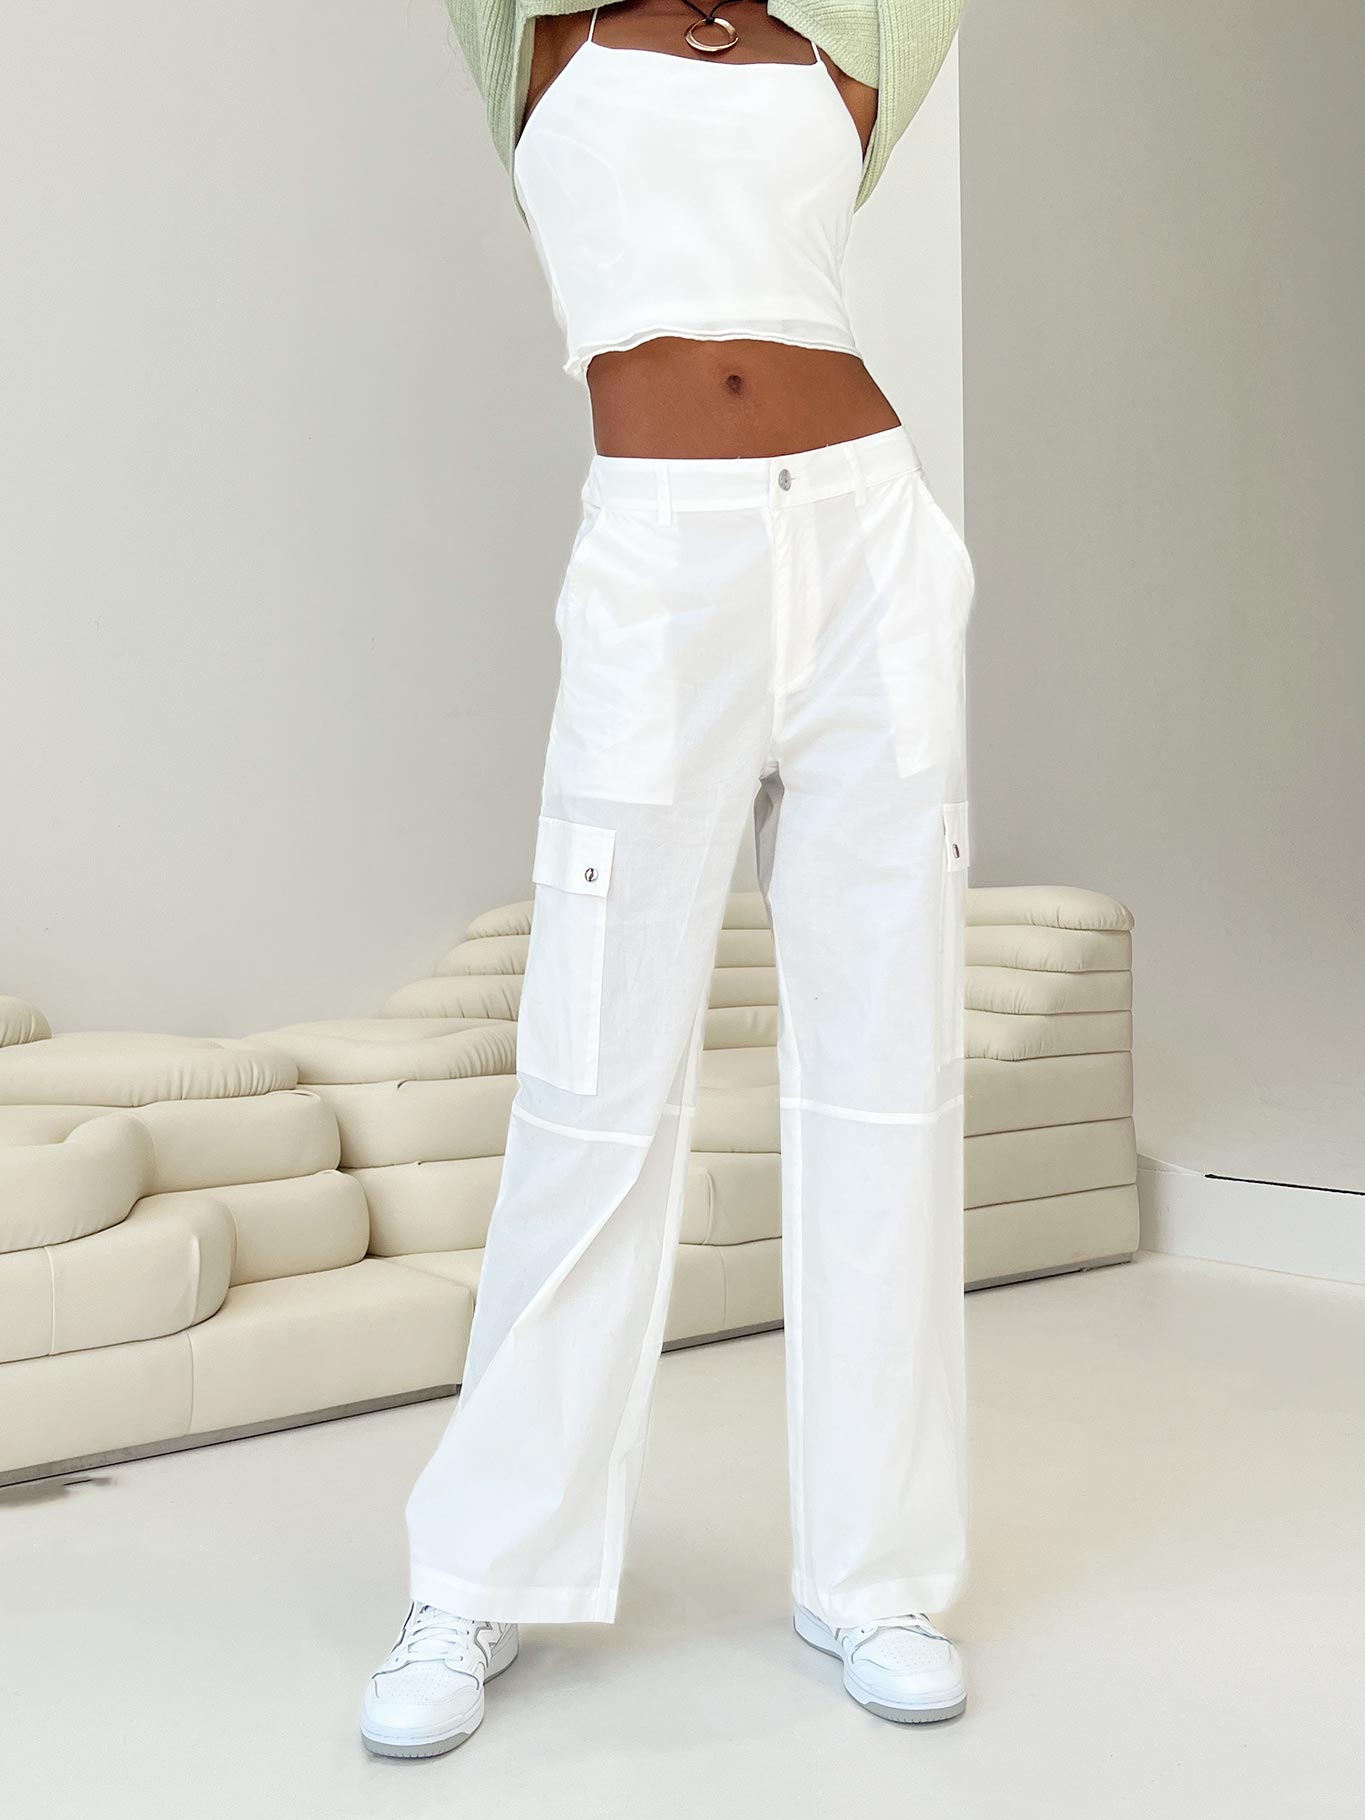 Buy KHUGIU,Harajuku Goth White Cargo Pants Women Goth Hippie Punk Pants  Loose Pants with Chain Baggy Oversize Korean Style White XXL at Amazon.in